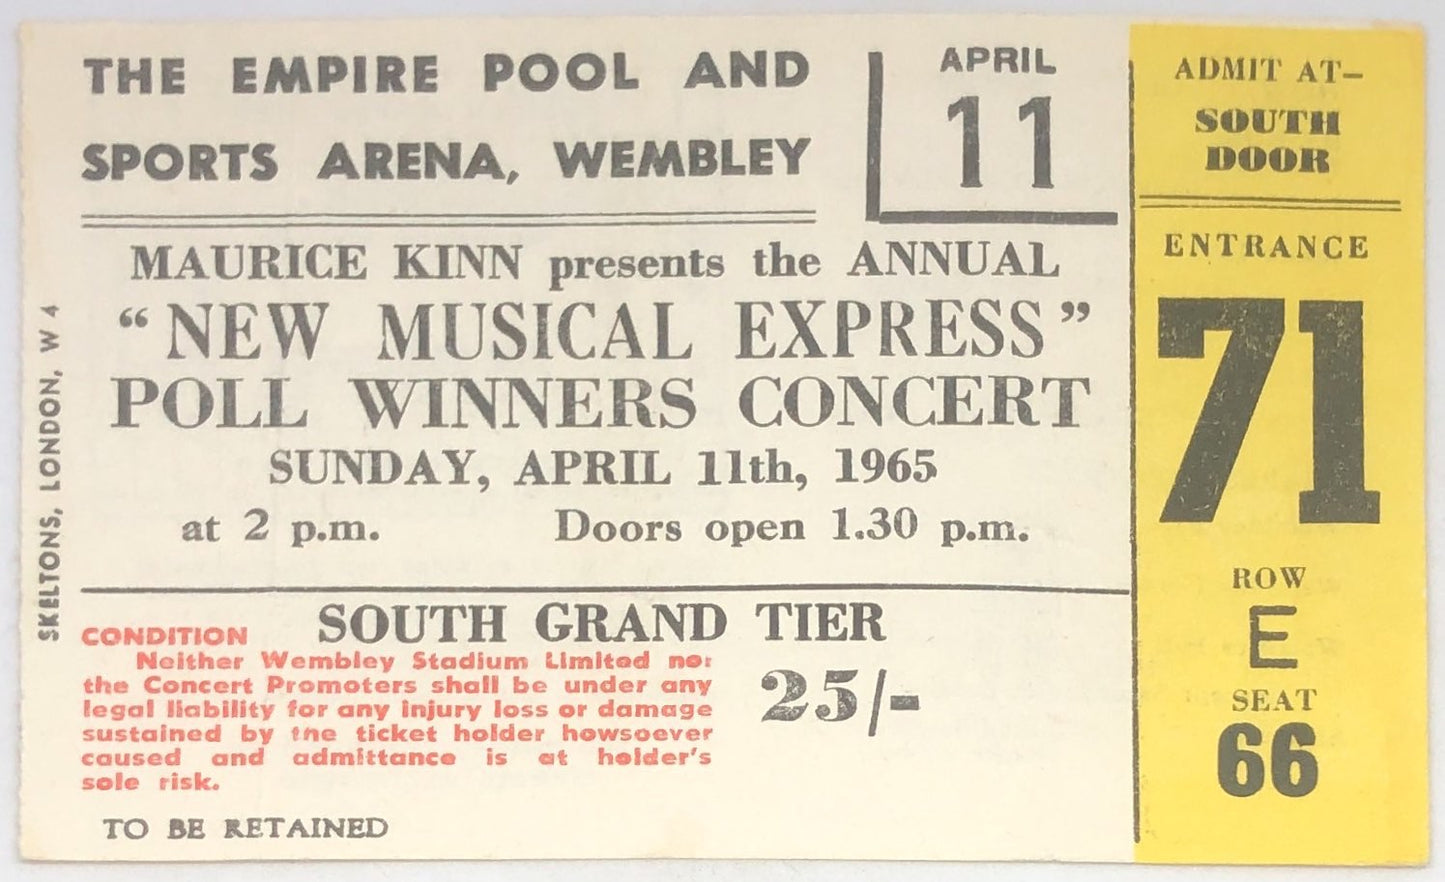 Beatles Rolling Stones Original Used Concert Ticket Empire Pool and Sports Arena Wembley London 1965